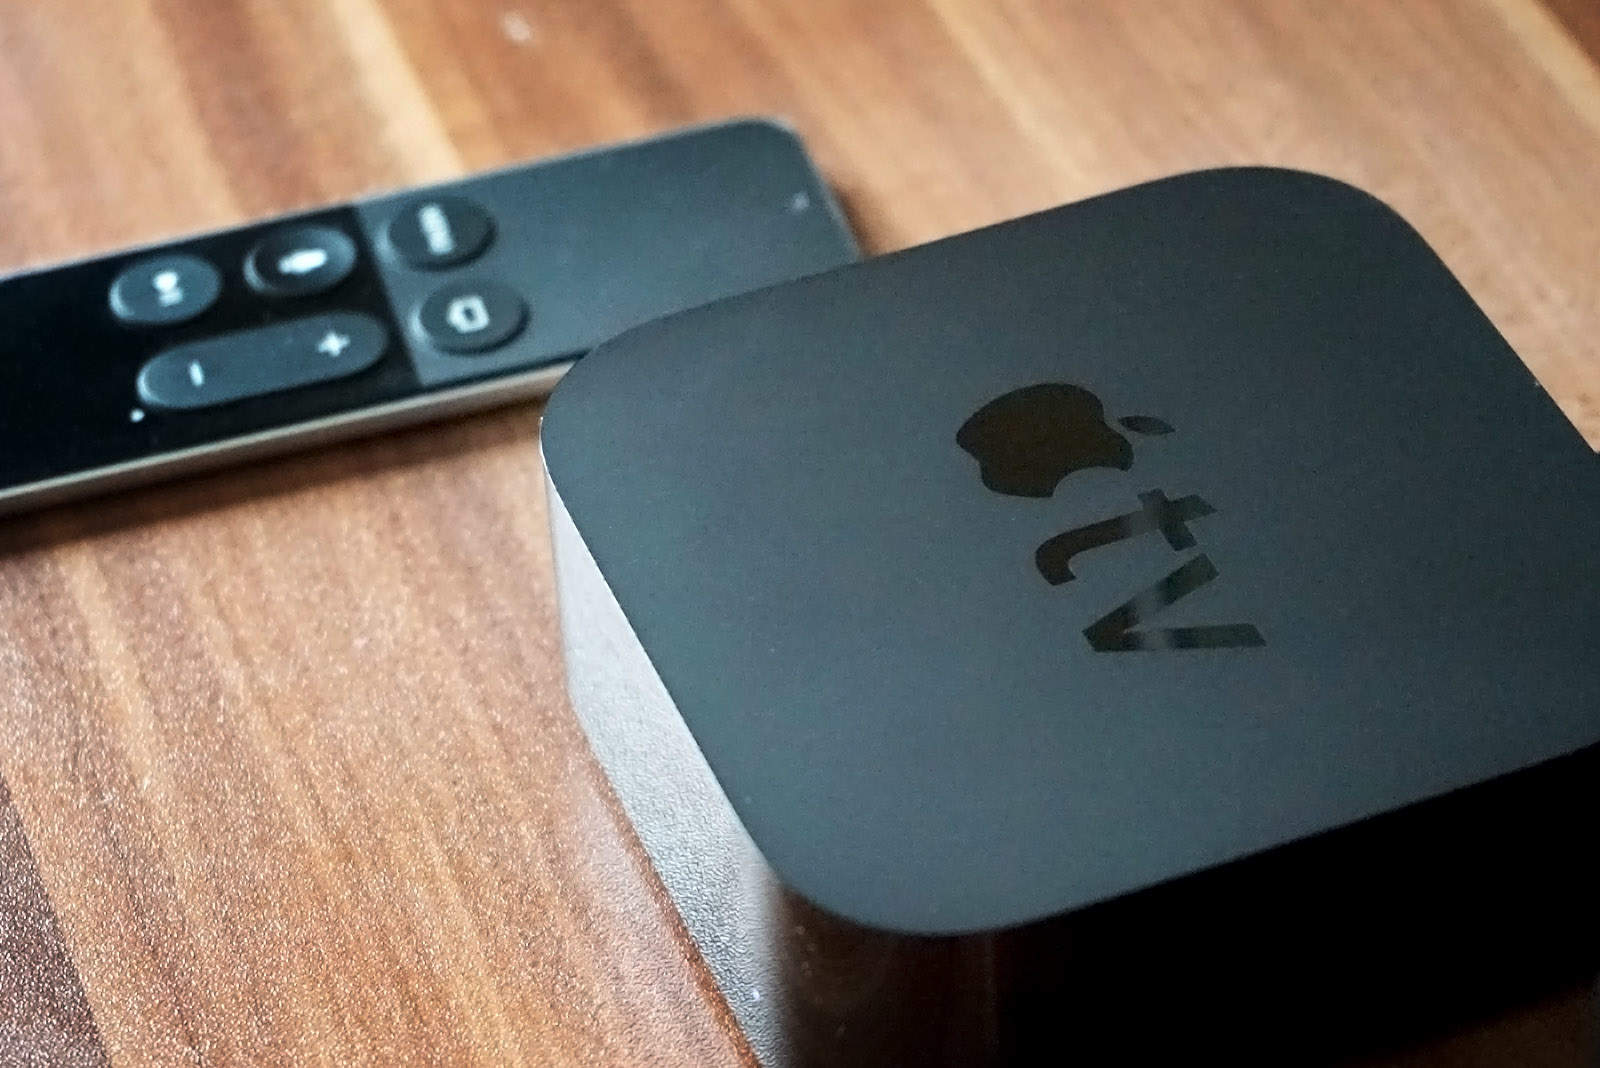 How To Use Your Apple TV With An IPad